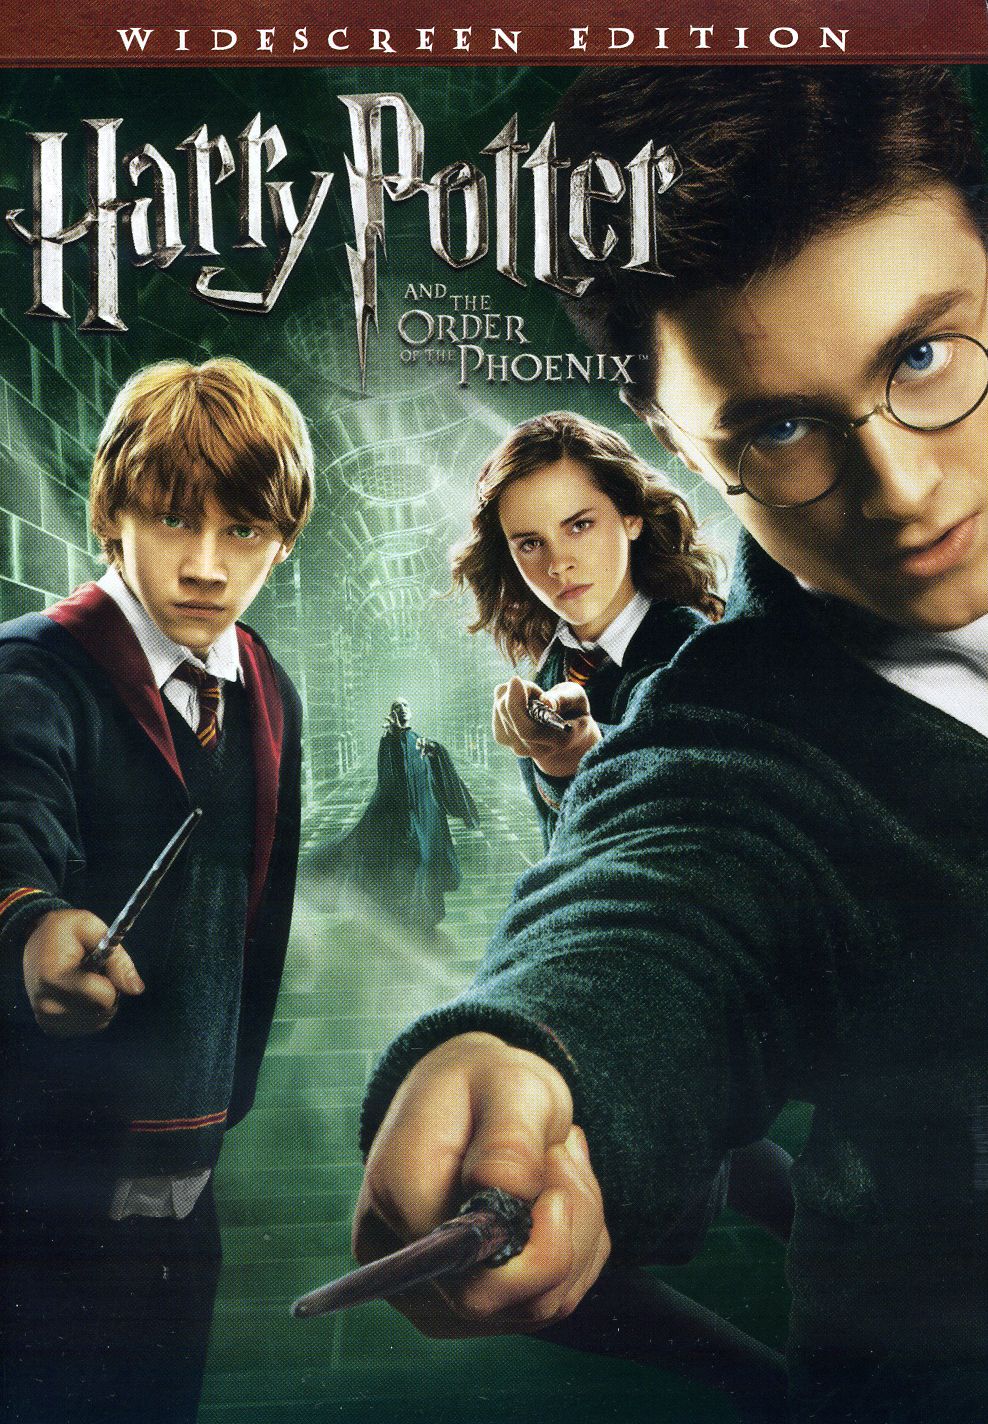 HARRY POTTER & THE ORDER OF THE PHOENIX / (AC3 WS)